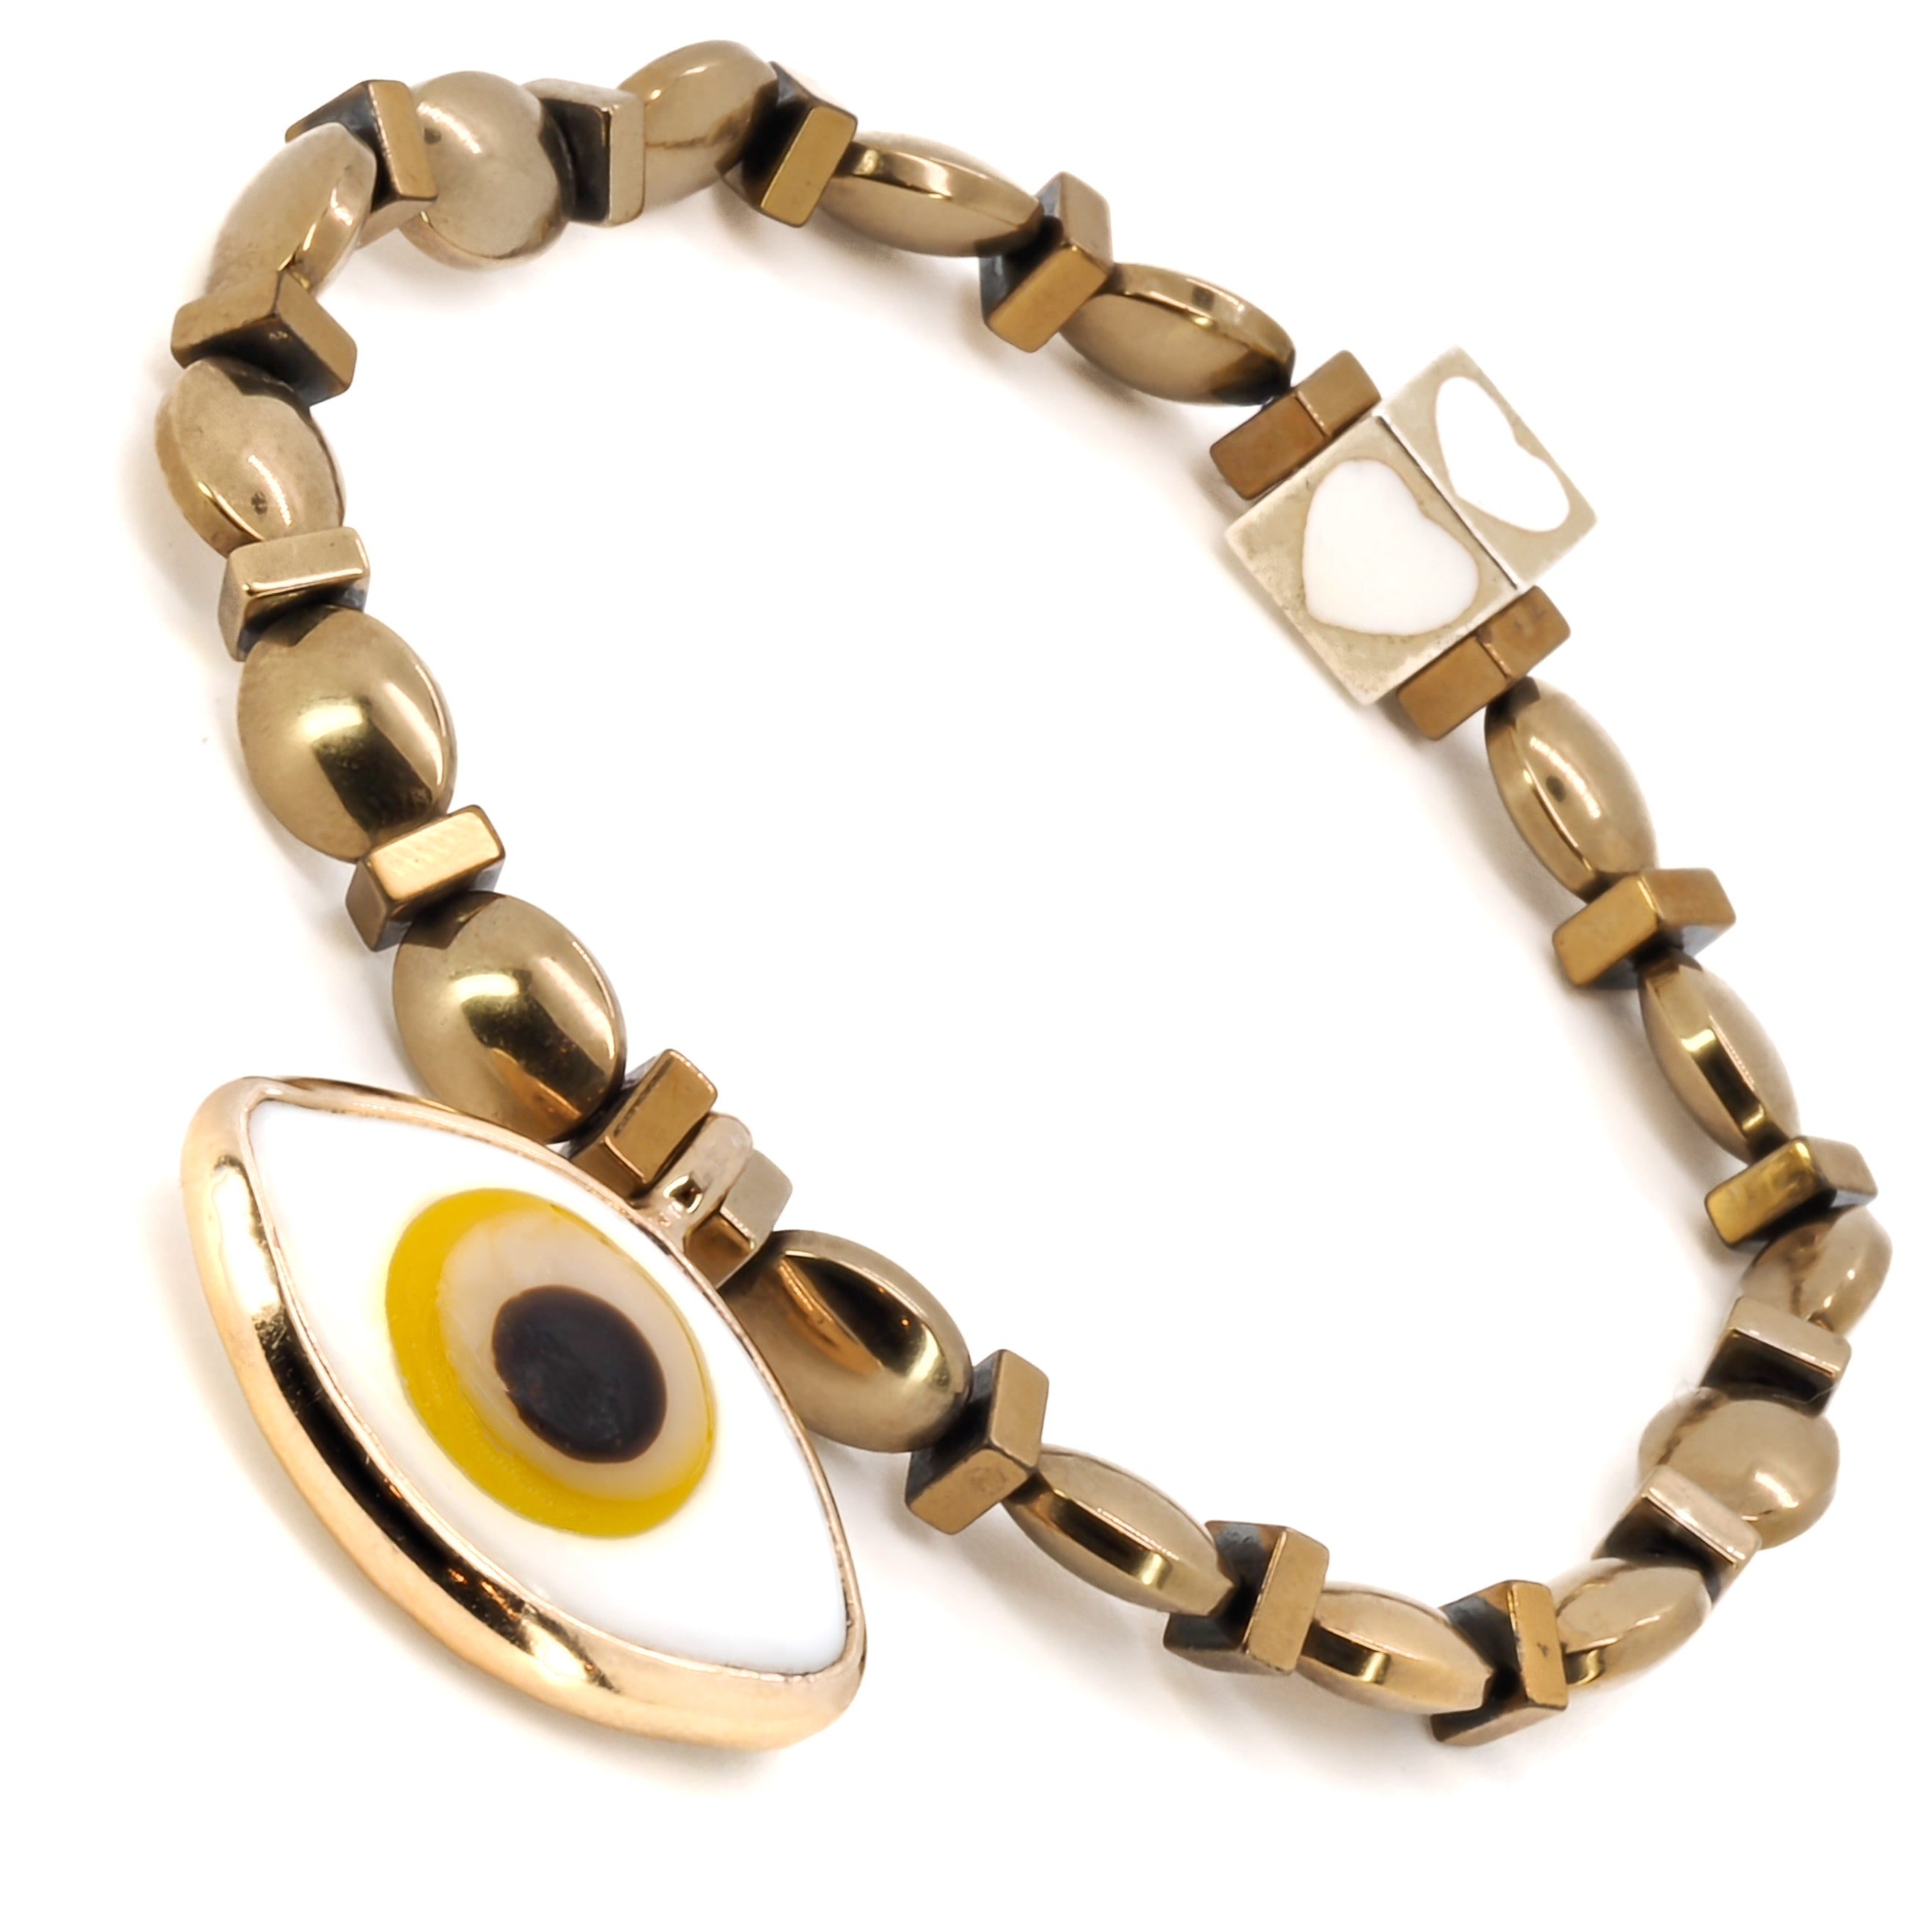 Adorn your wrist with the Yellow Evil Eye Bracelet, a stunning accessory that combines the elegance of gold-colored hematite beads with the protective symbolism of the evil eye.